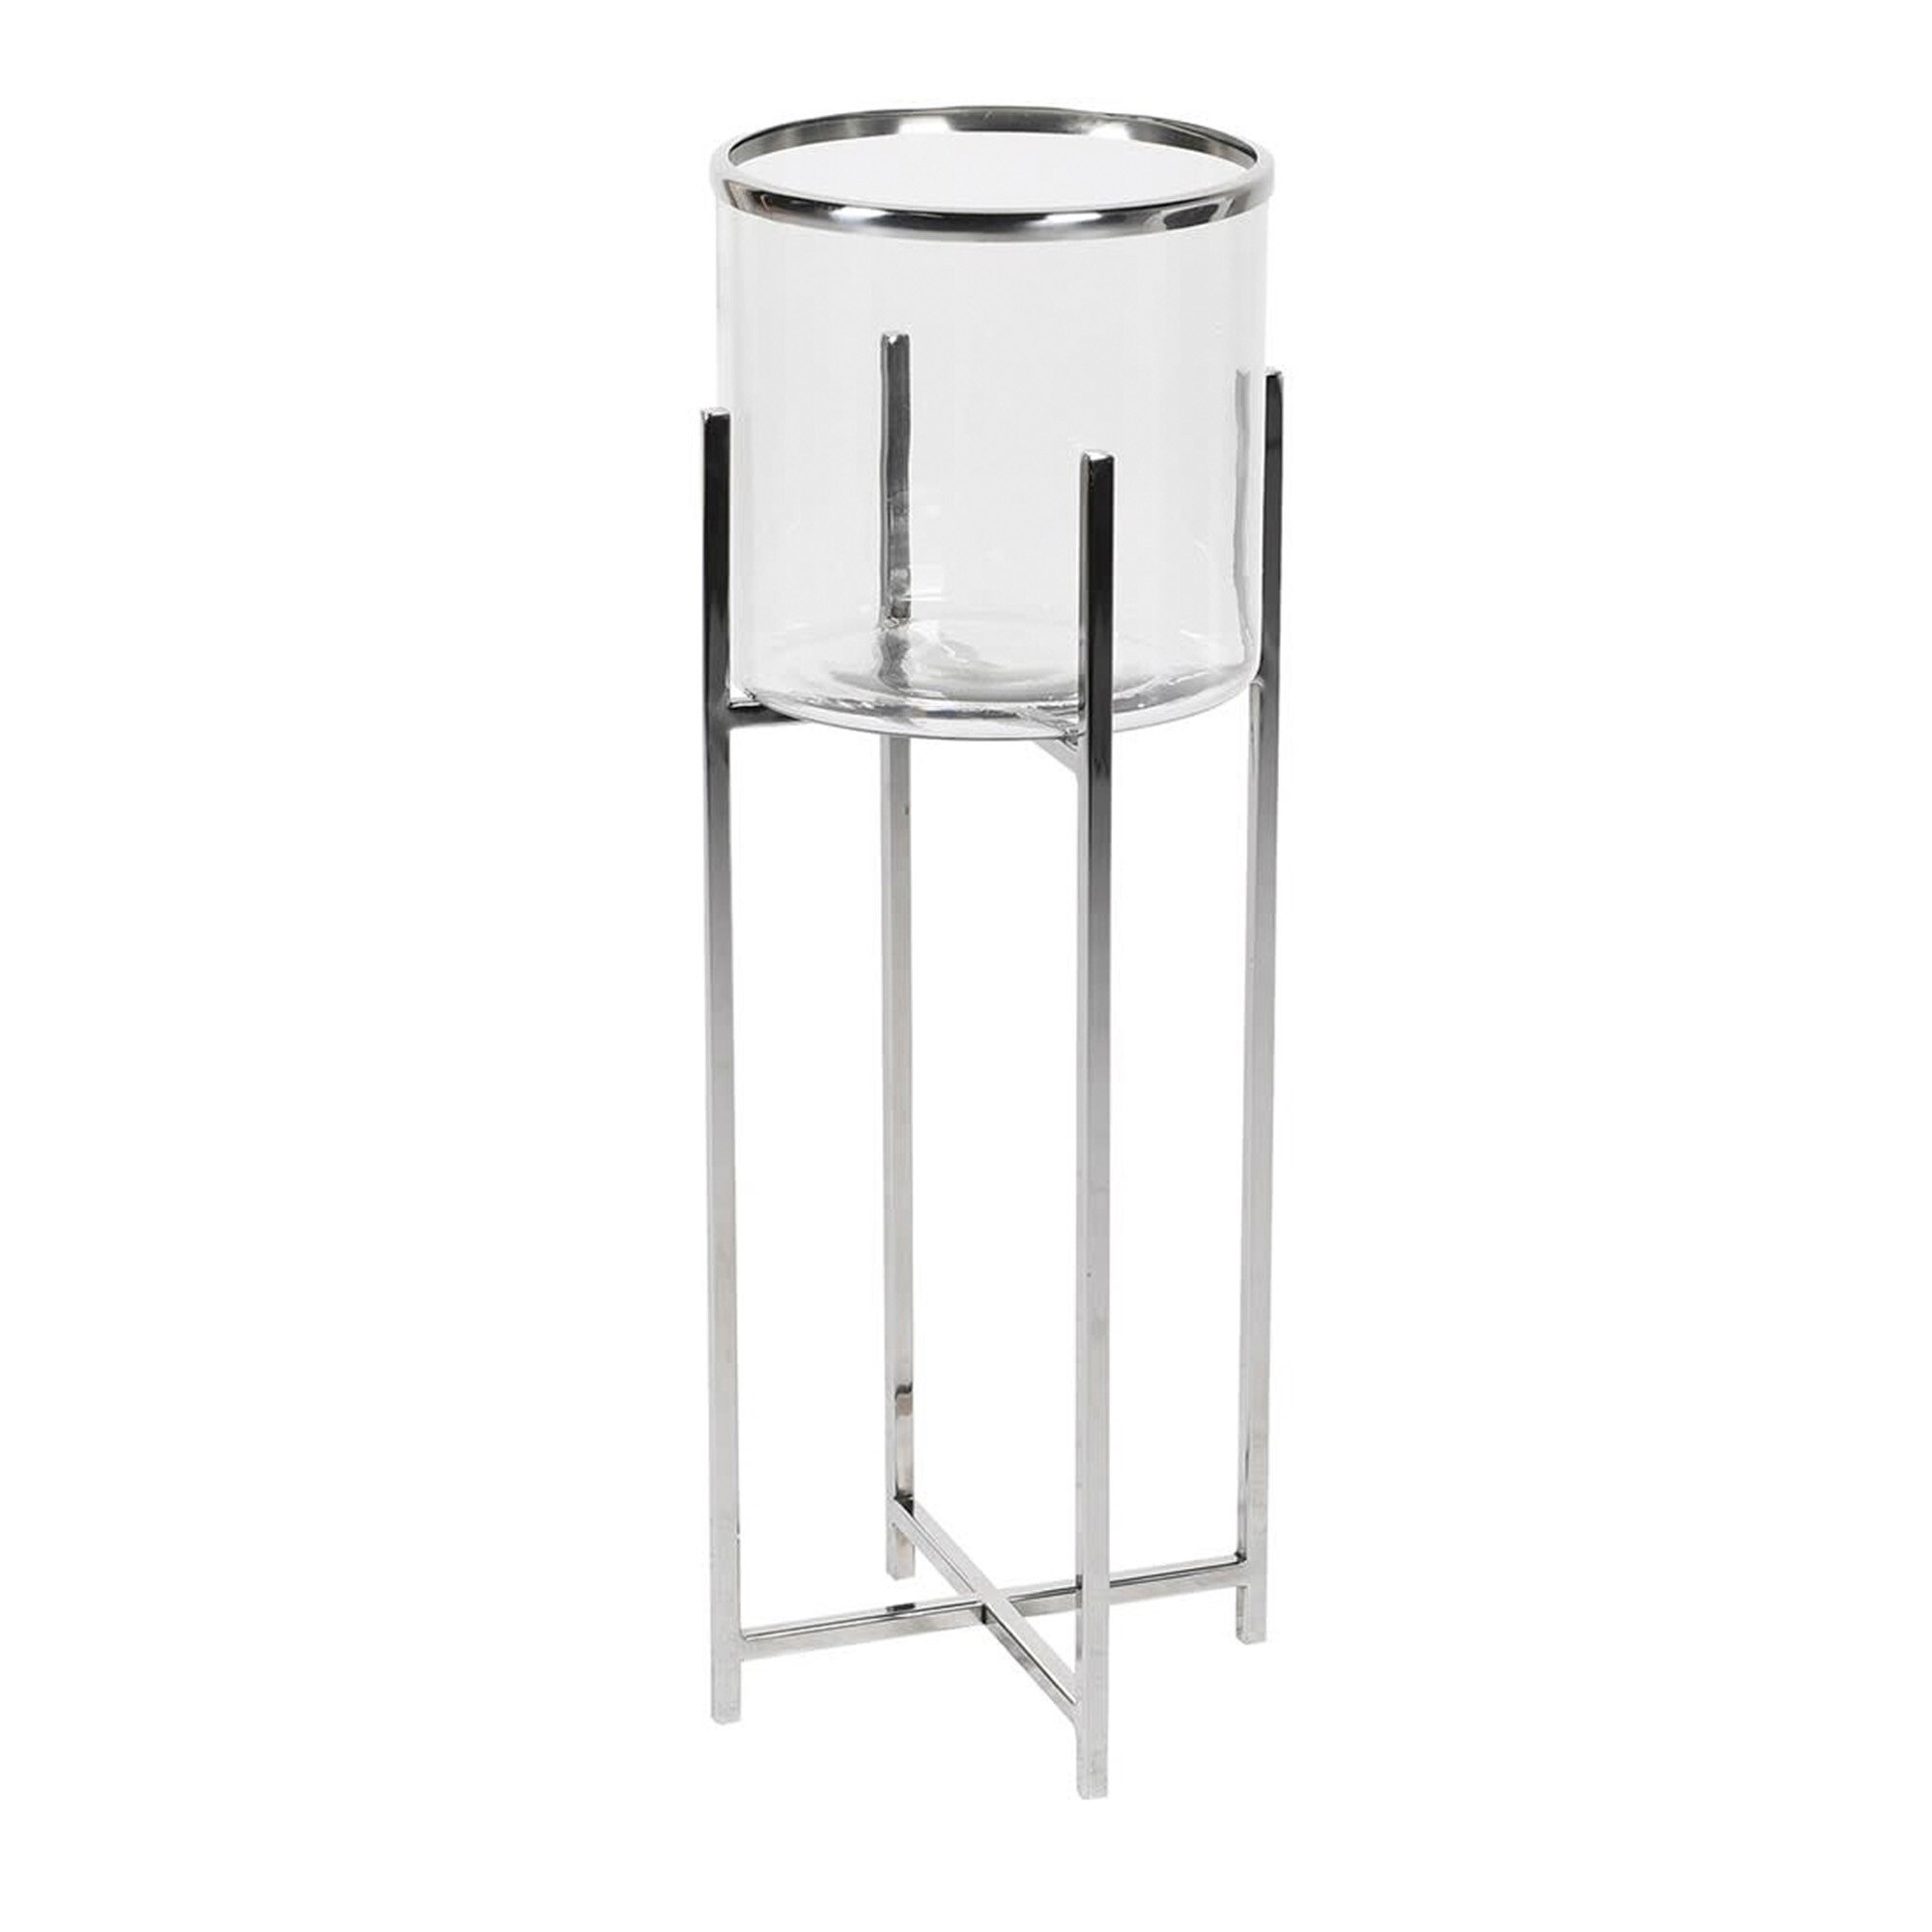 SILVER STAND HURRICANE Metal | Barker & Stonehouse